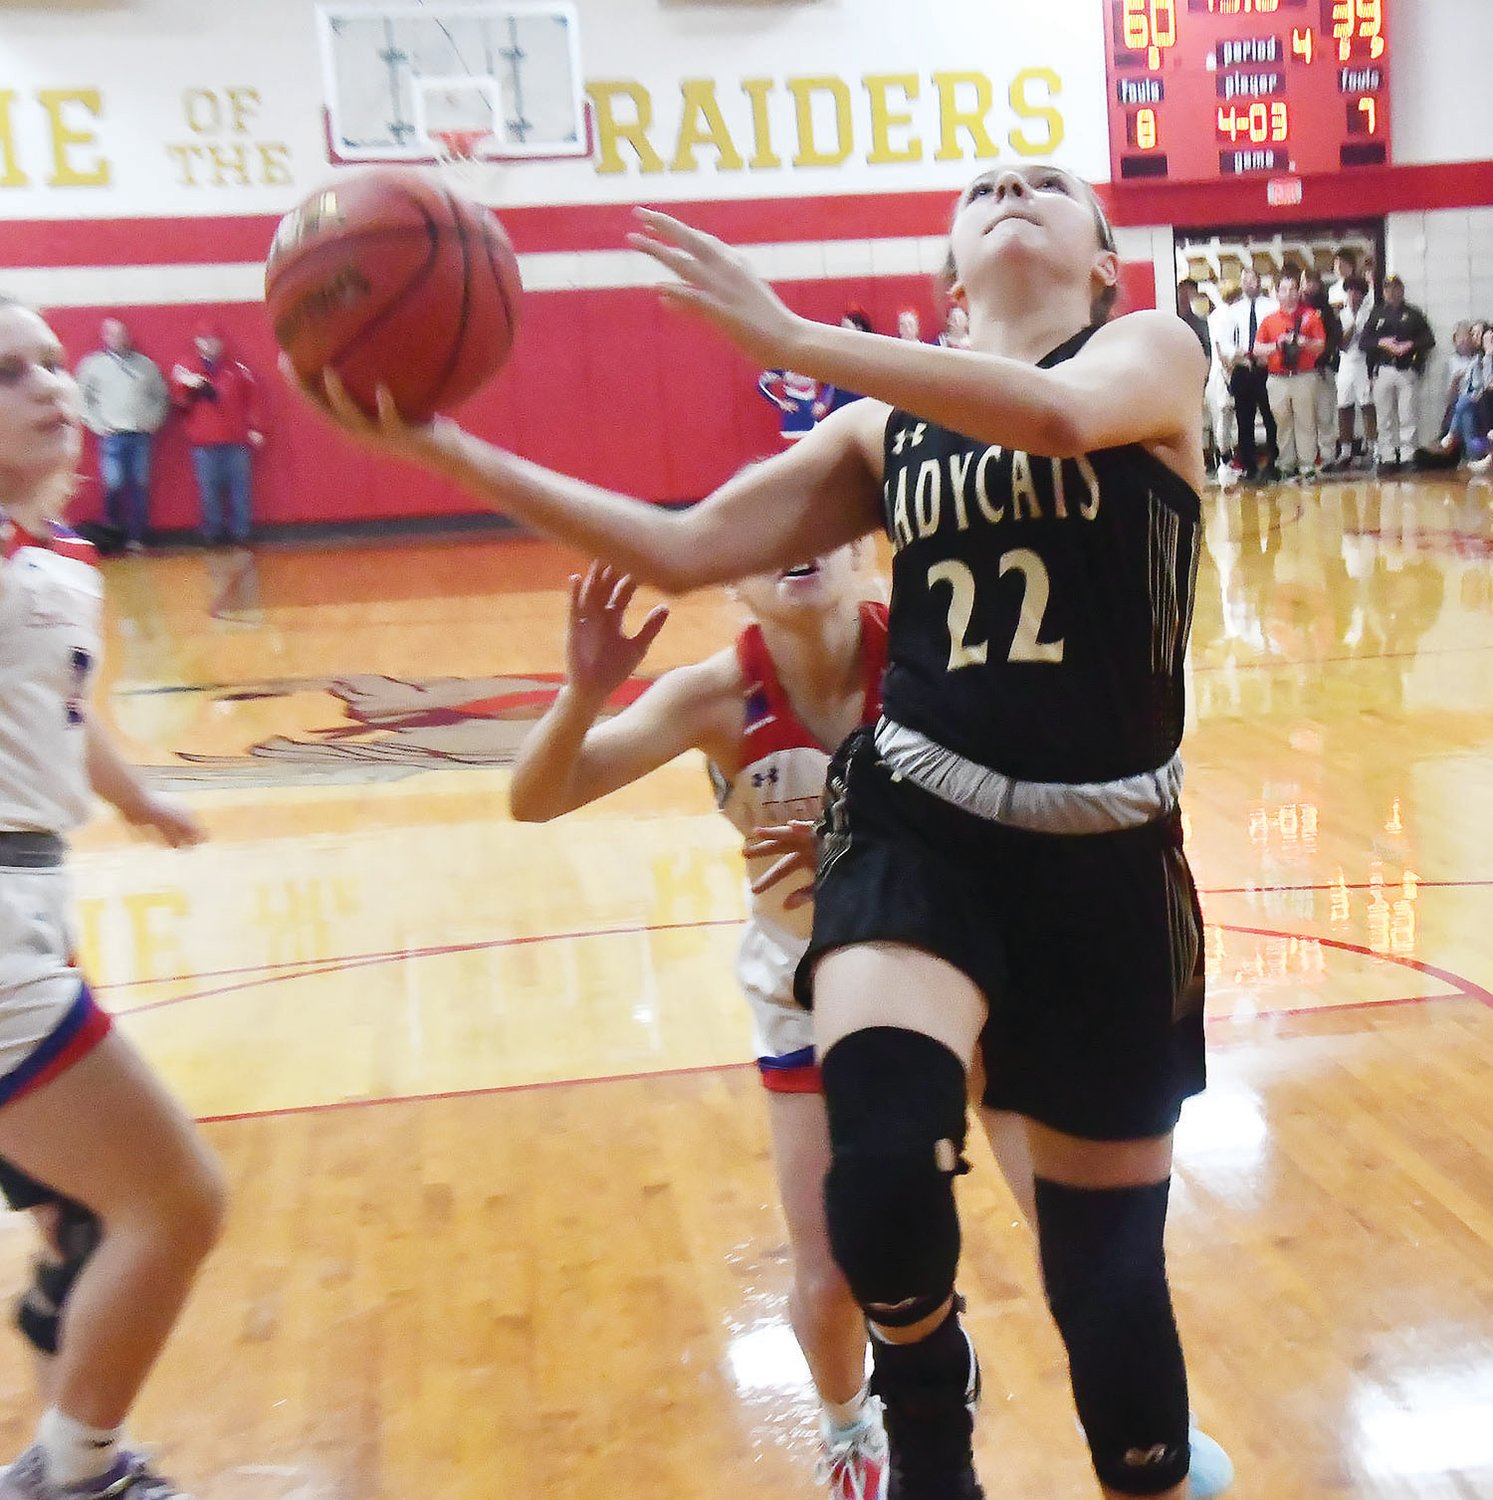 Cairo's Mallori Hankins drives to the basket during the final minute of play, scoring two points.